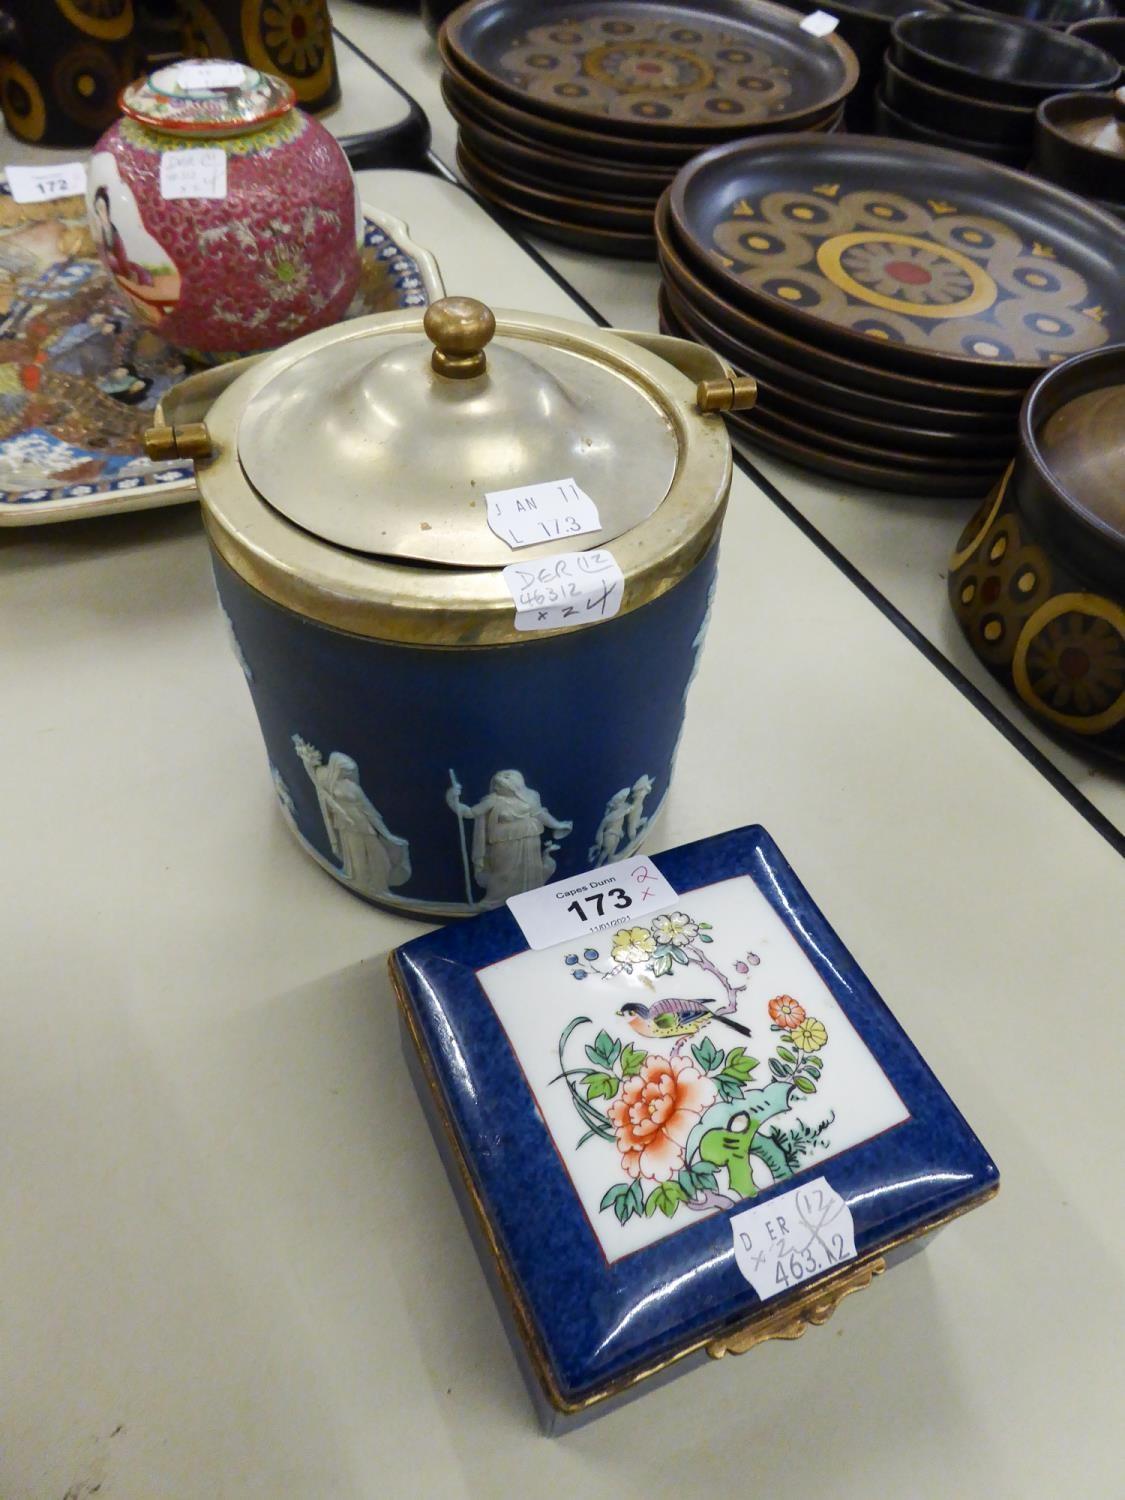 WEDGWOOD PRE-WAR BLUE AND WHITE JASPERWARE BISCUIT BARREL, DESIGN OF CLASSICAL FIGURES AND HAVING